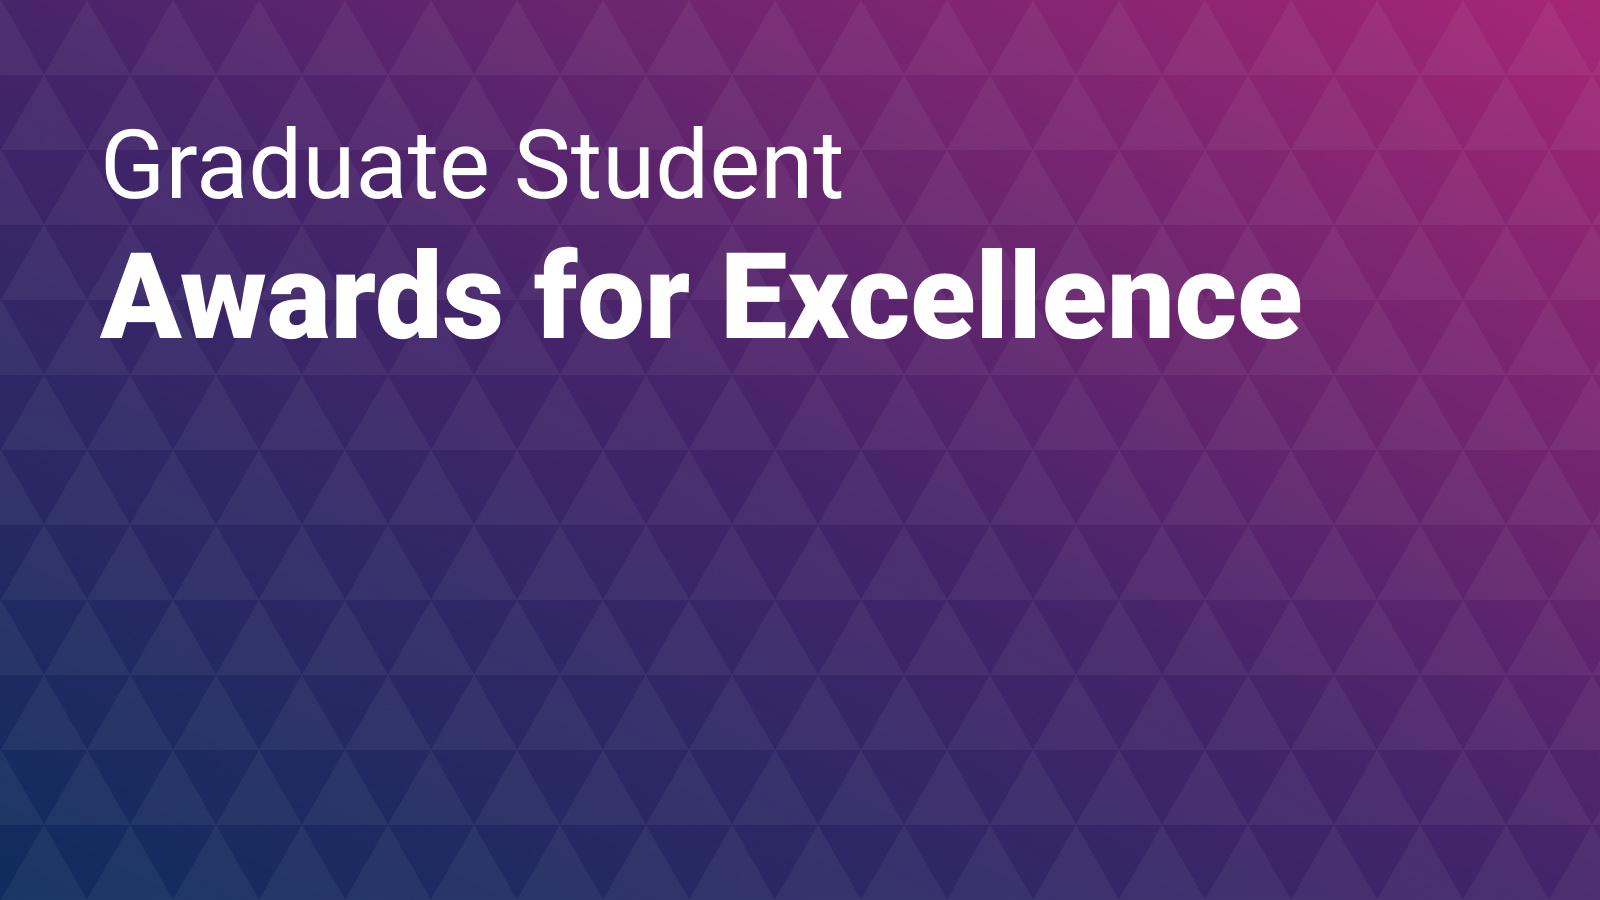 Prismatic purple-toned background with white lettering: Graduate Student Awards for Excellence